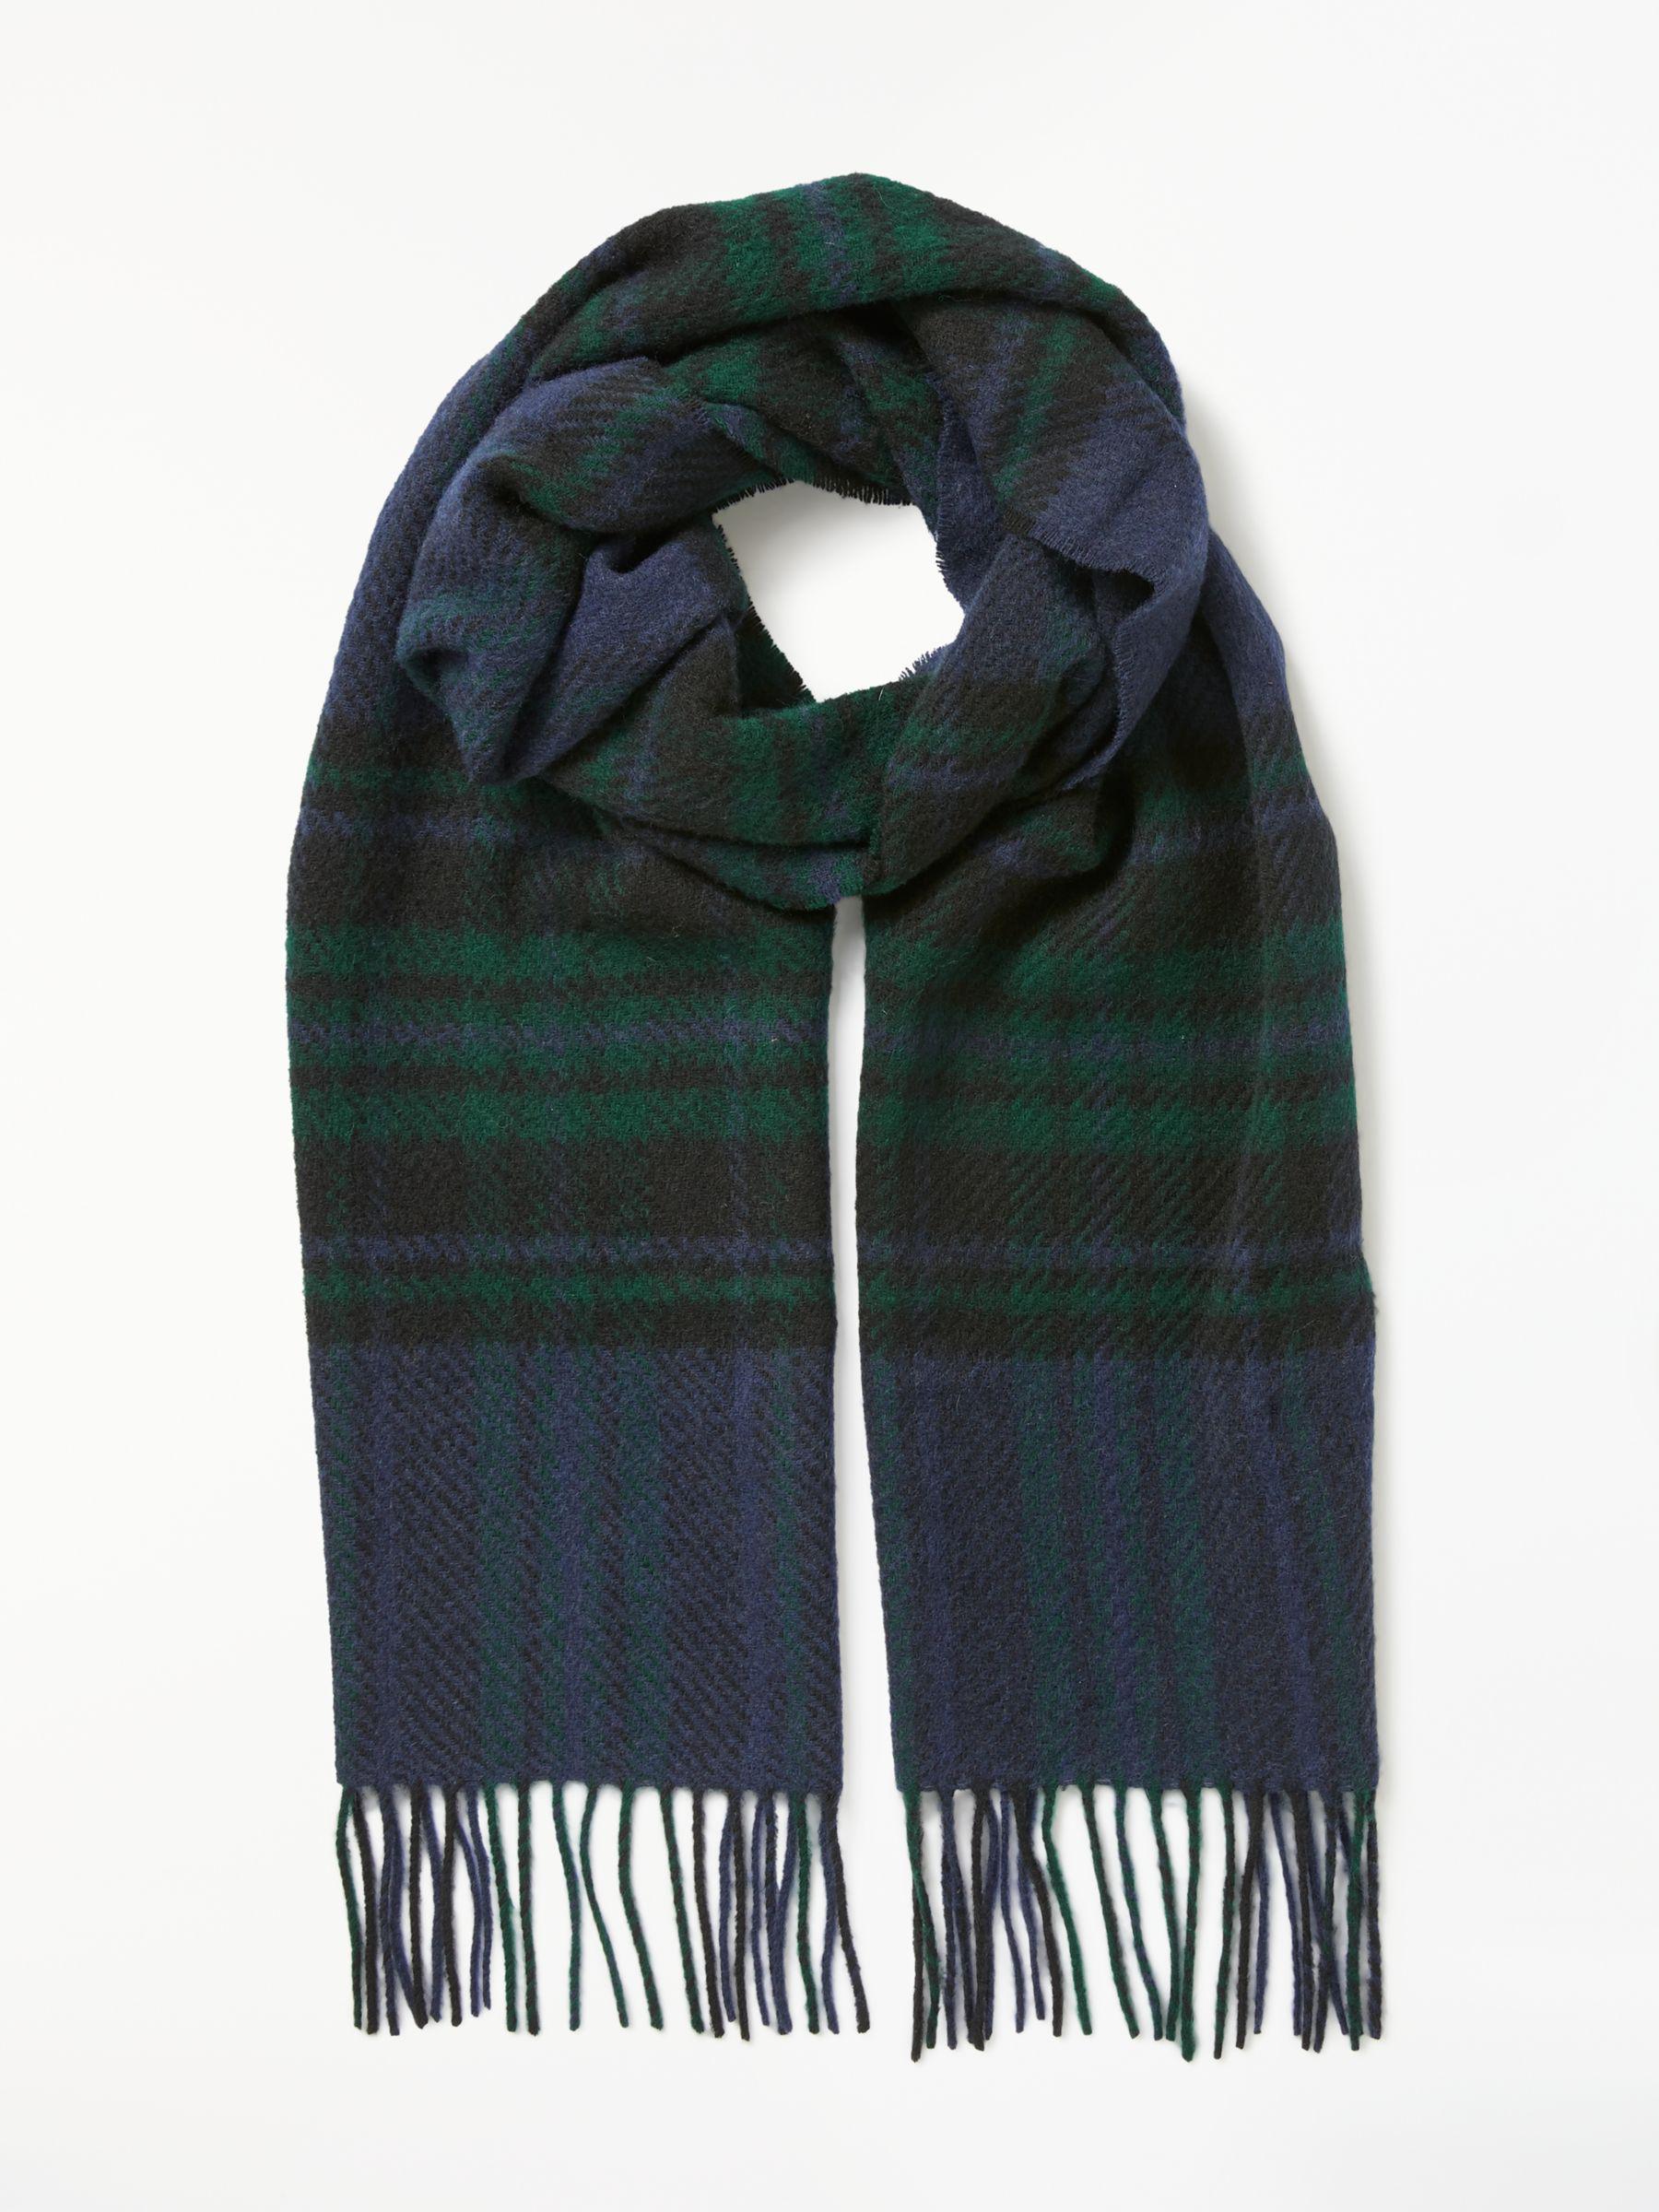 Barbour Moons Lowerfell Lambswool Check Scarf in Navy/Green (Green) for Men  - Lyst